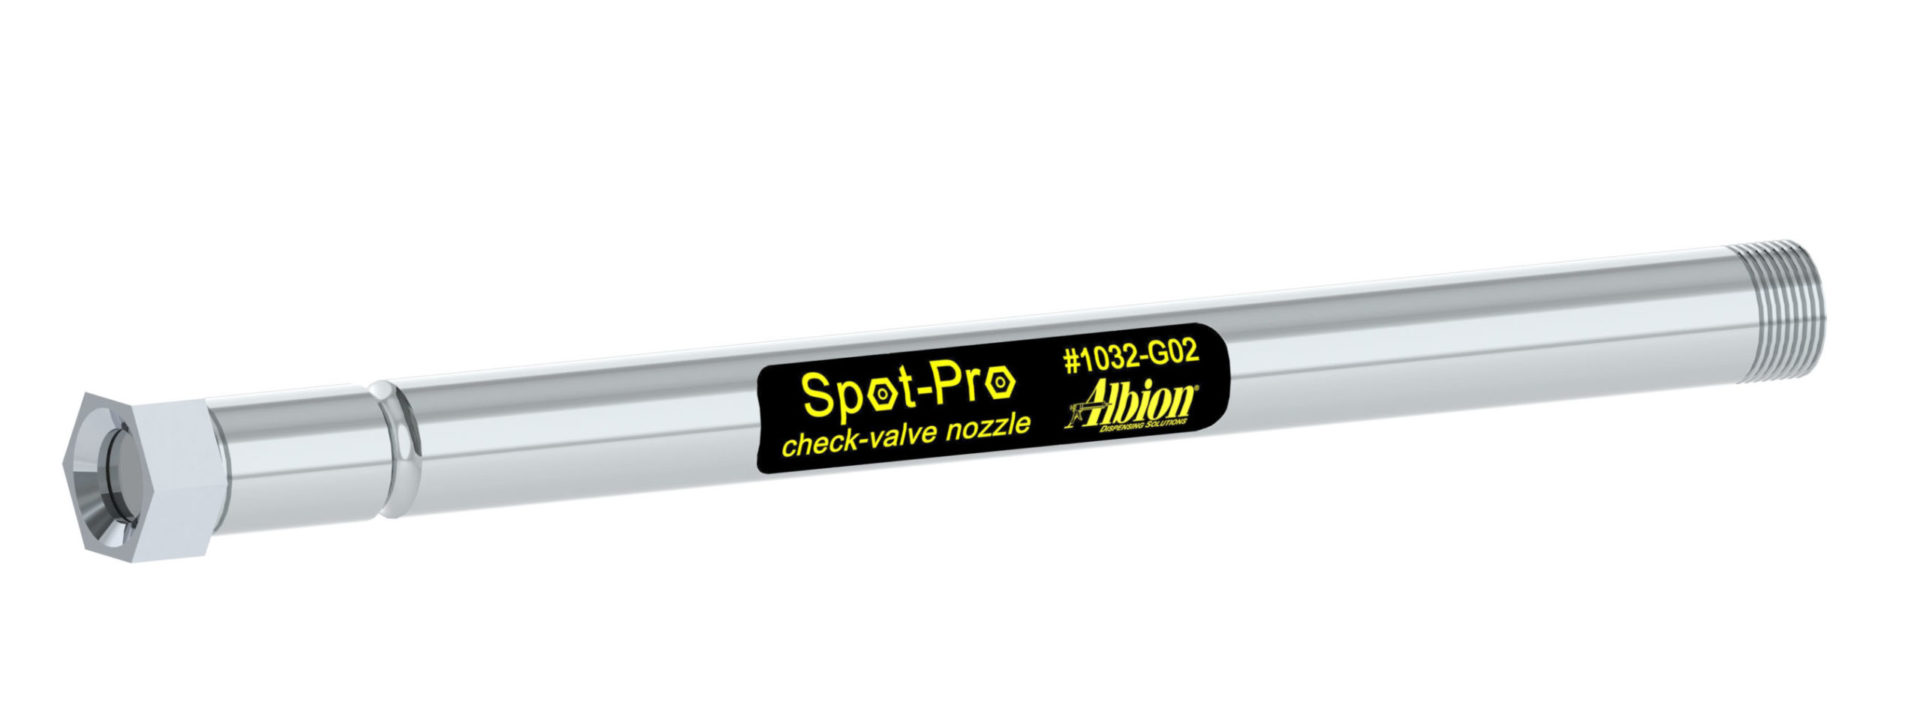 Spot-Pro Nozzle for Sealing Exposed Metal Roofing/Siding Fasteners